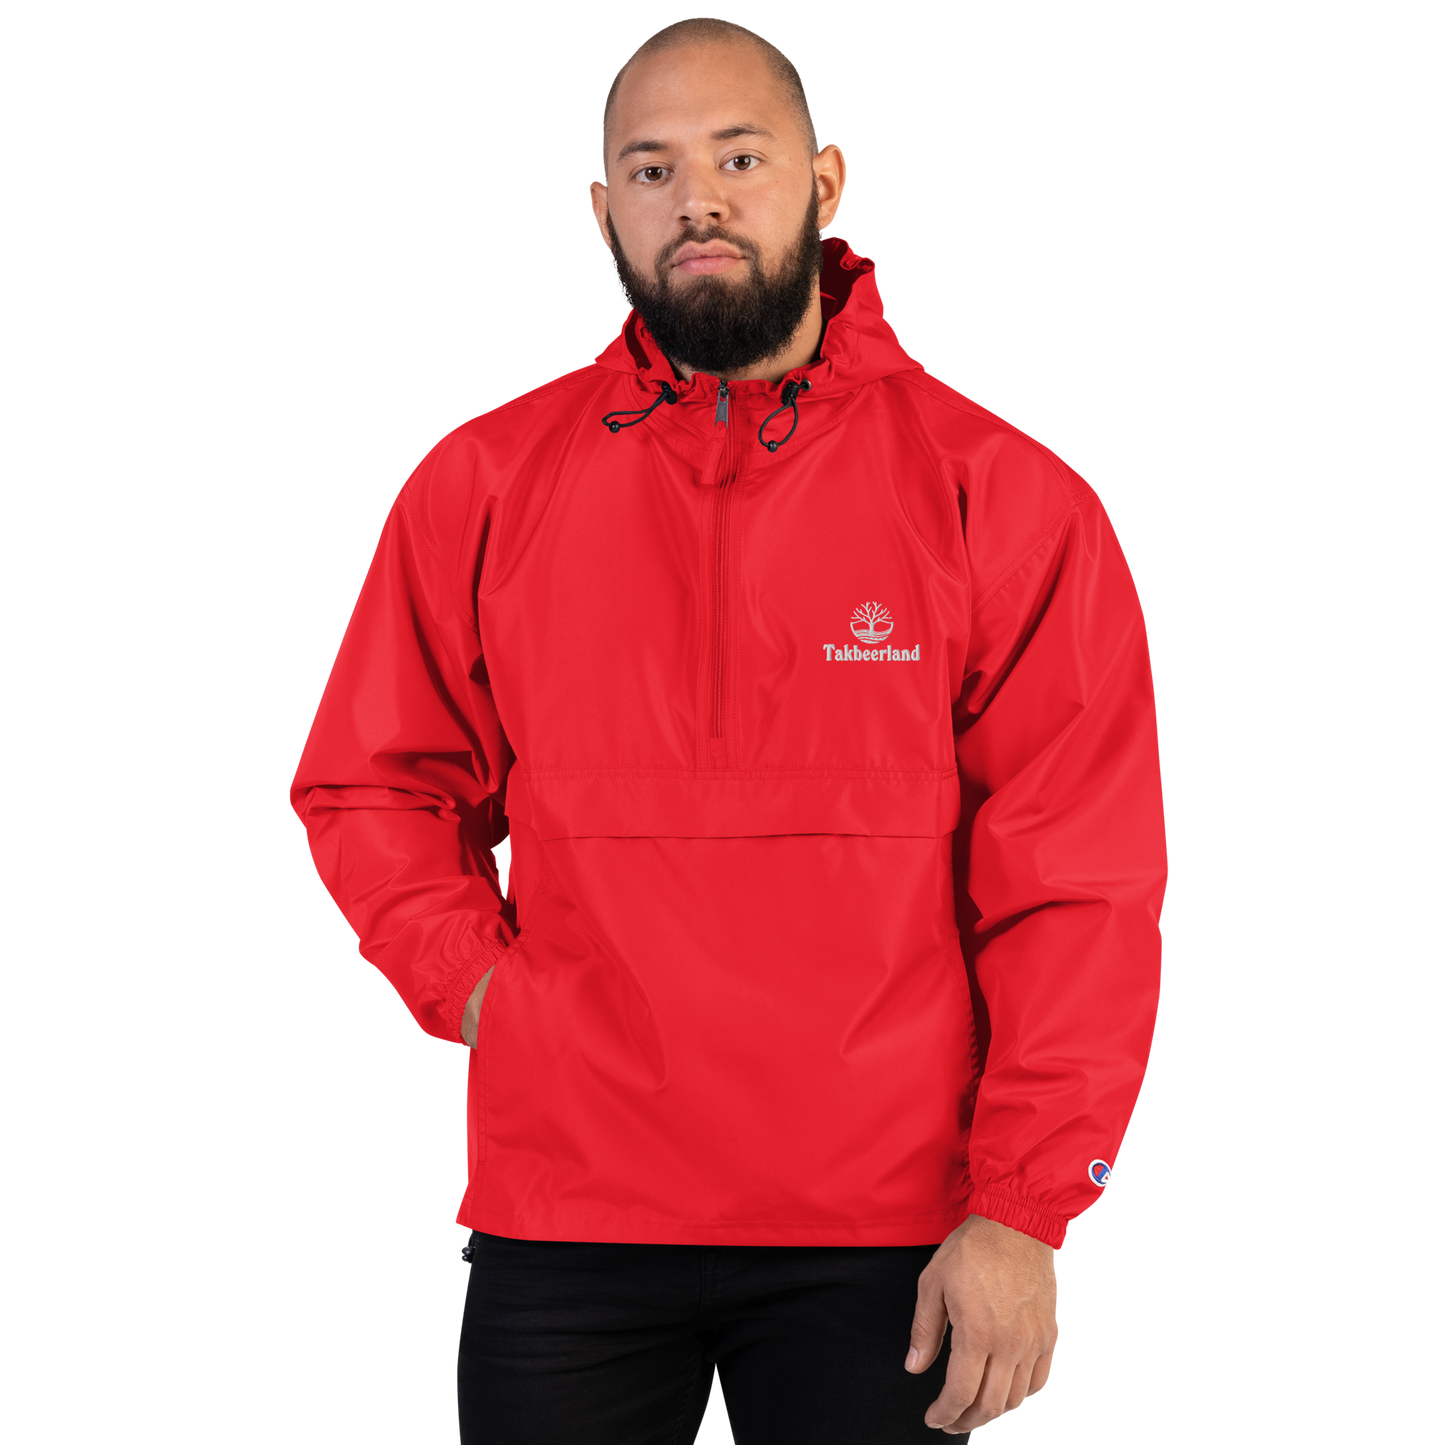 JACKET HOODIE Champion Packable (Adult) - TAKBEERLAND FULL LOGO (Left Chest) w/ LOGO (Right Arm/Back) - White Stitch